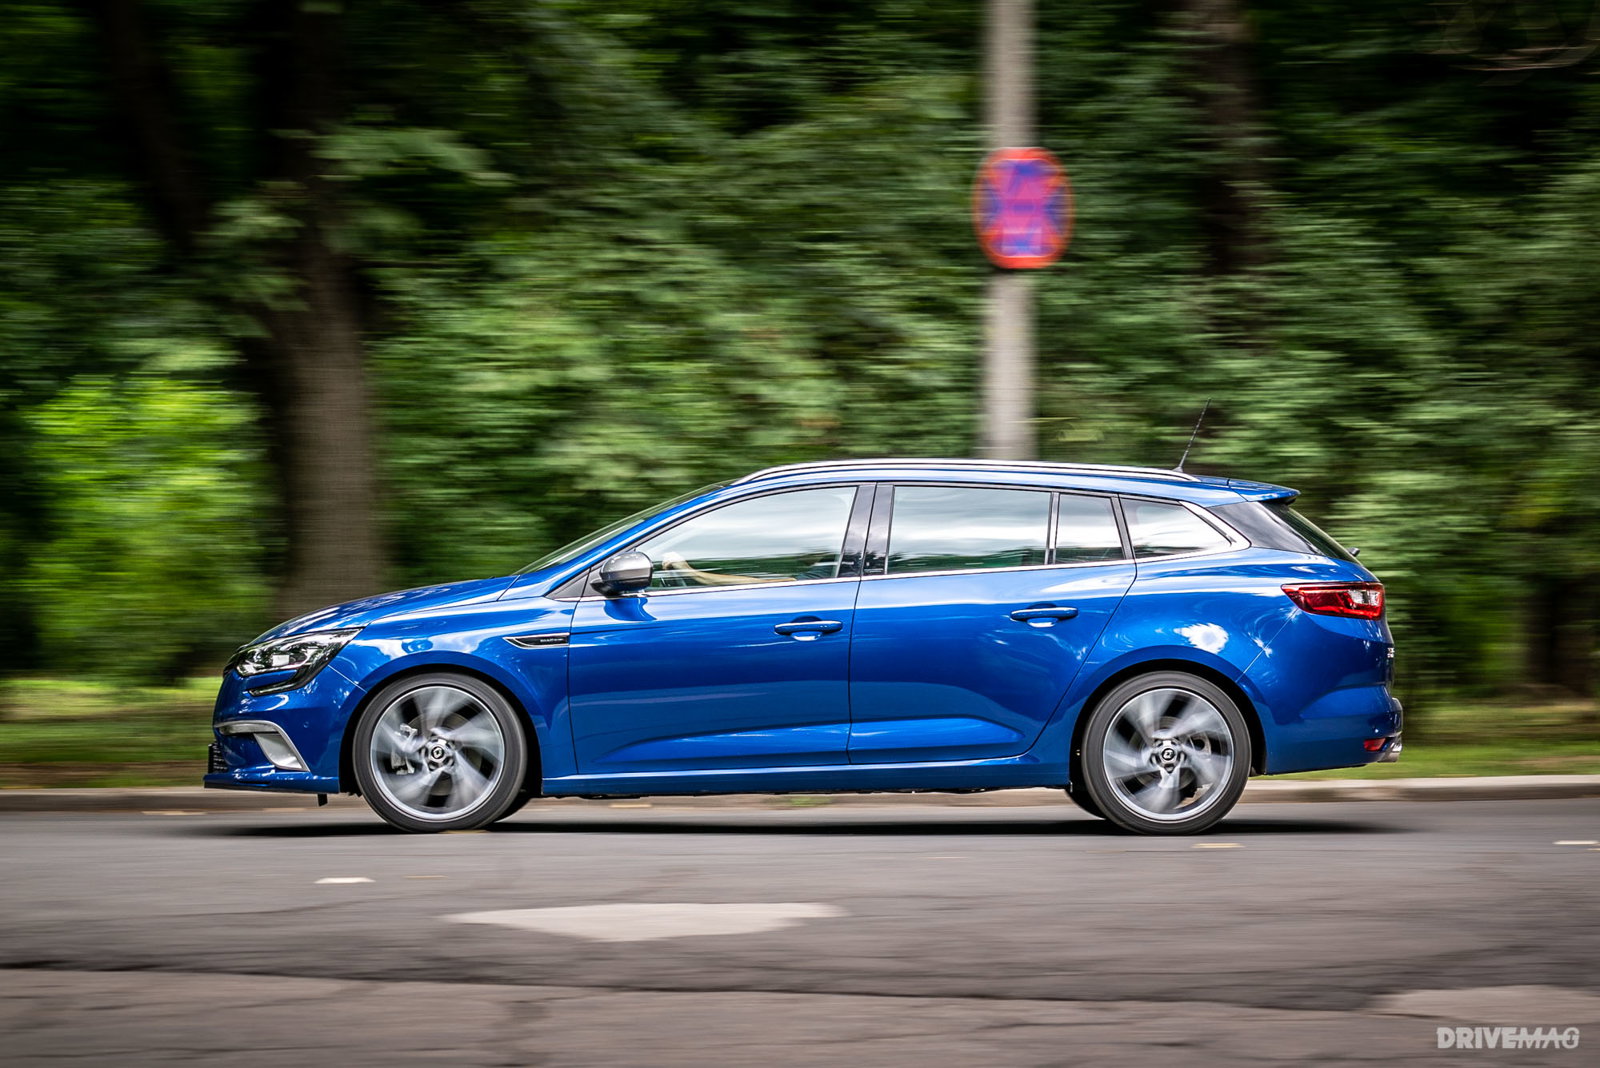 staking schrijven Verenigen 2018 Renault Megane Estate GT review: the people's quickish wagon |  DriveMag Cars